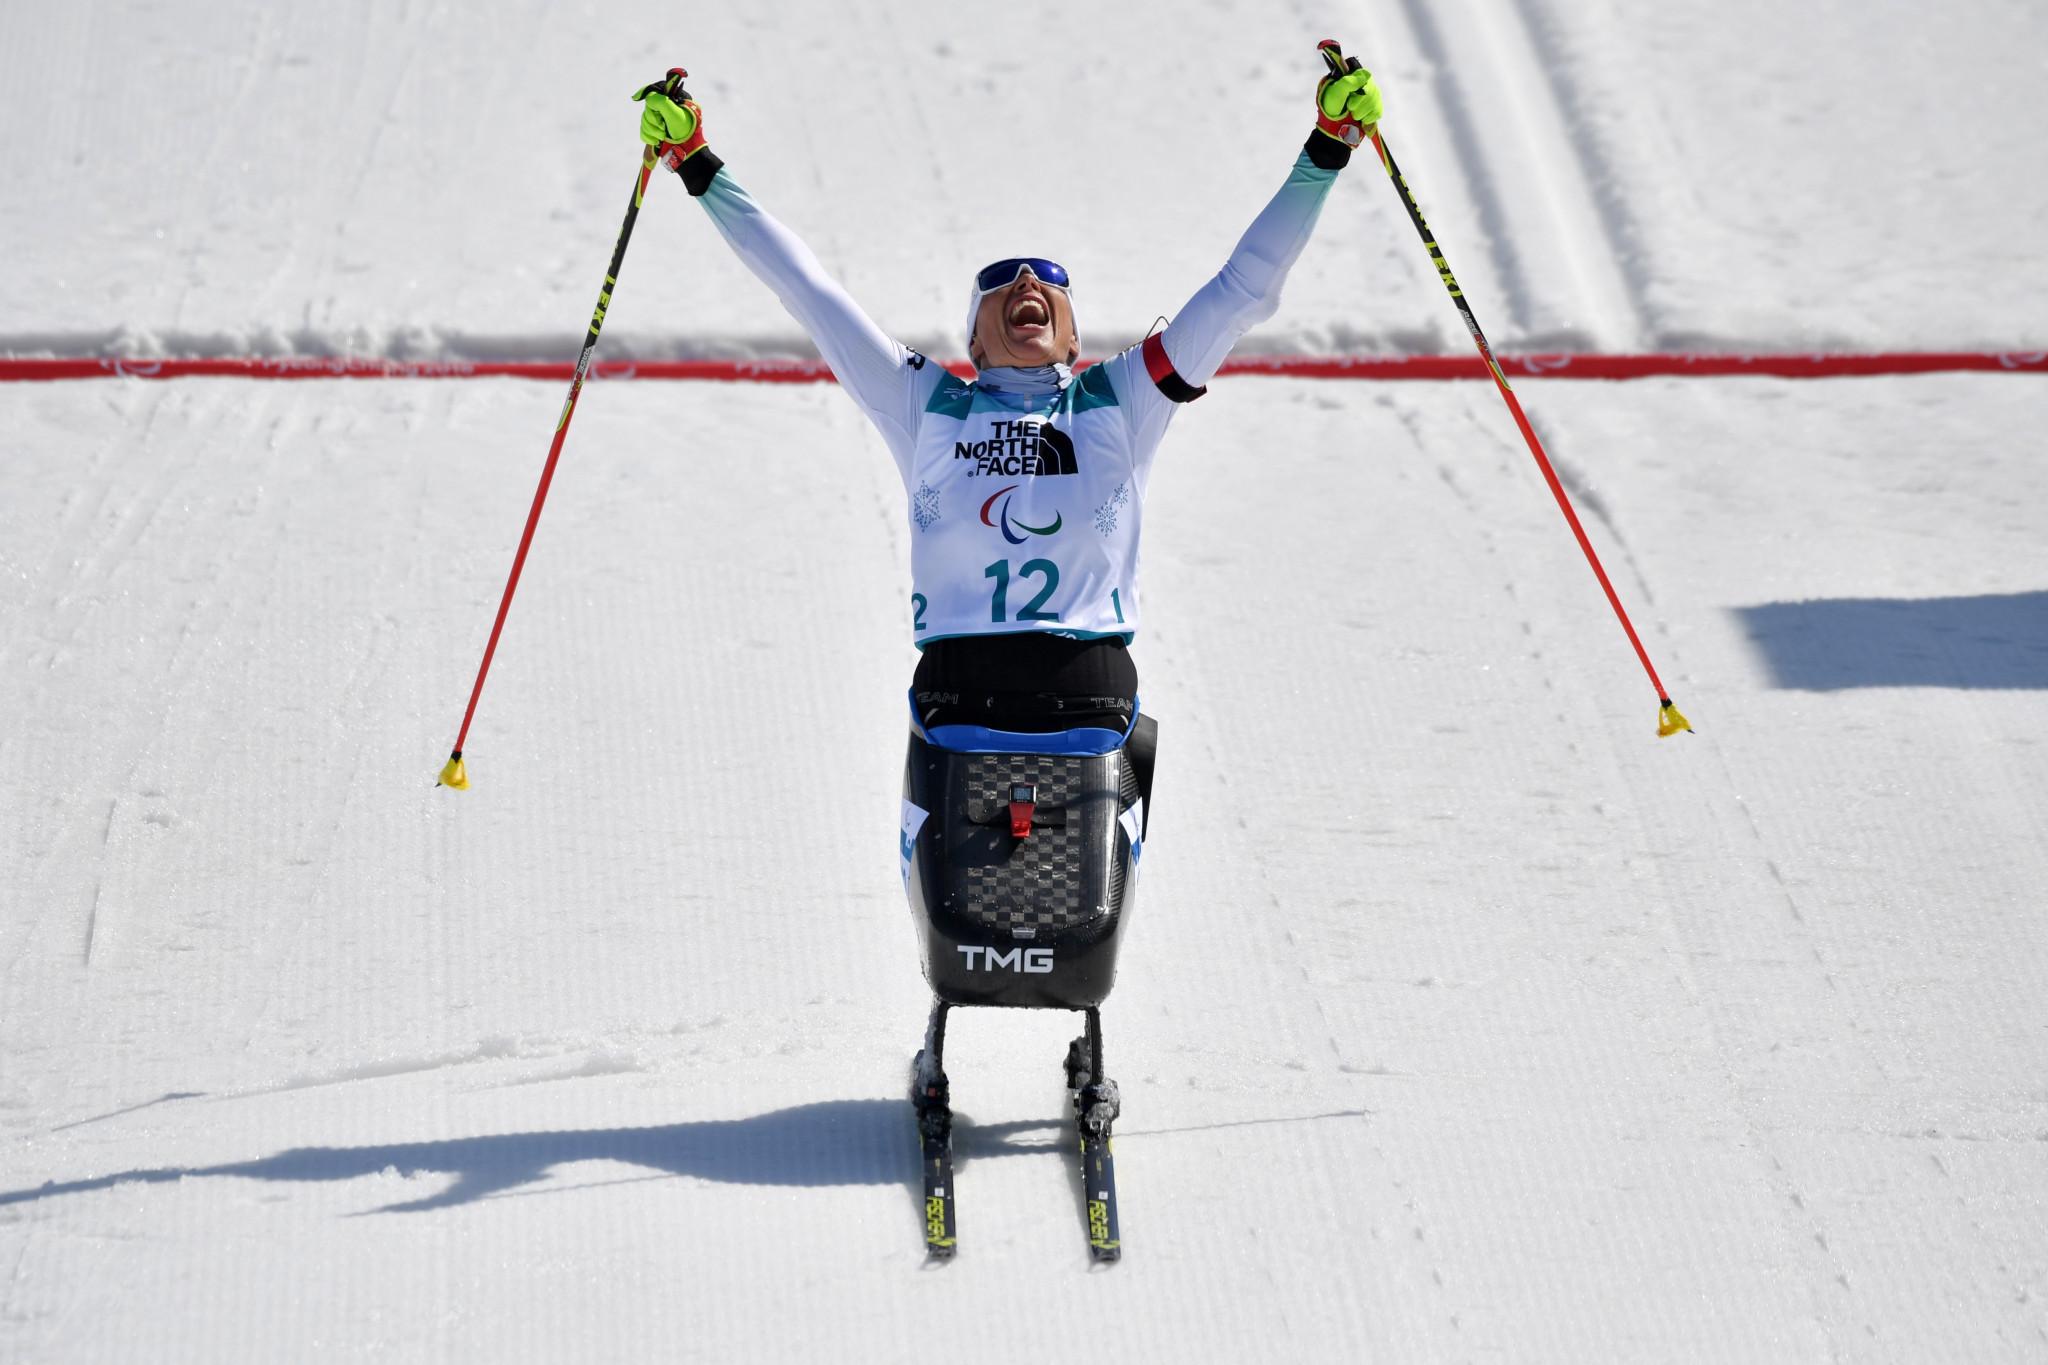 Germany’s Andrea Eskau secured her 10th Paralympic title across both winter and summer sports by winning the women's 10km sitting biathlon competition ©Getty Images